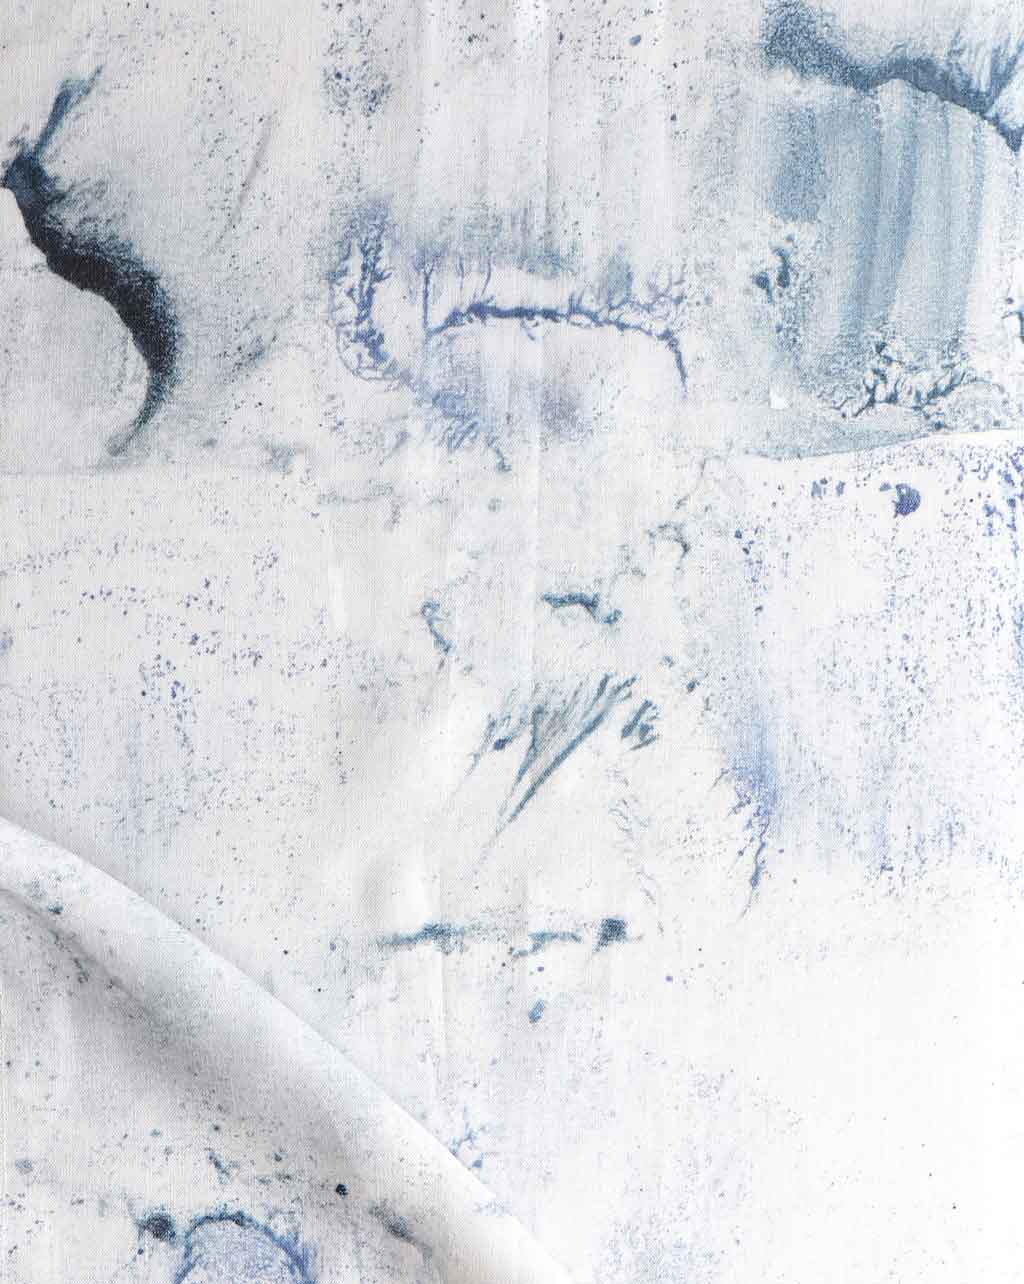 A close up of a blue and white painting on a piece of Melting Checks Fabric Ocean with muted blues